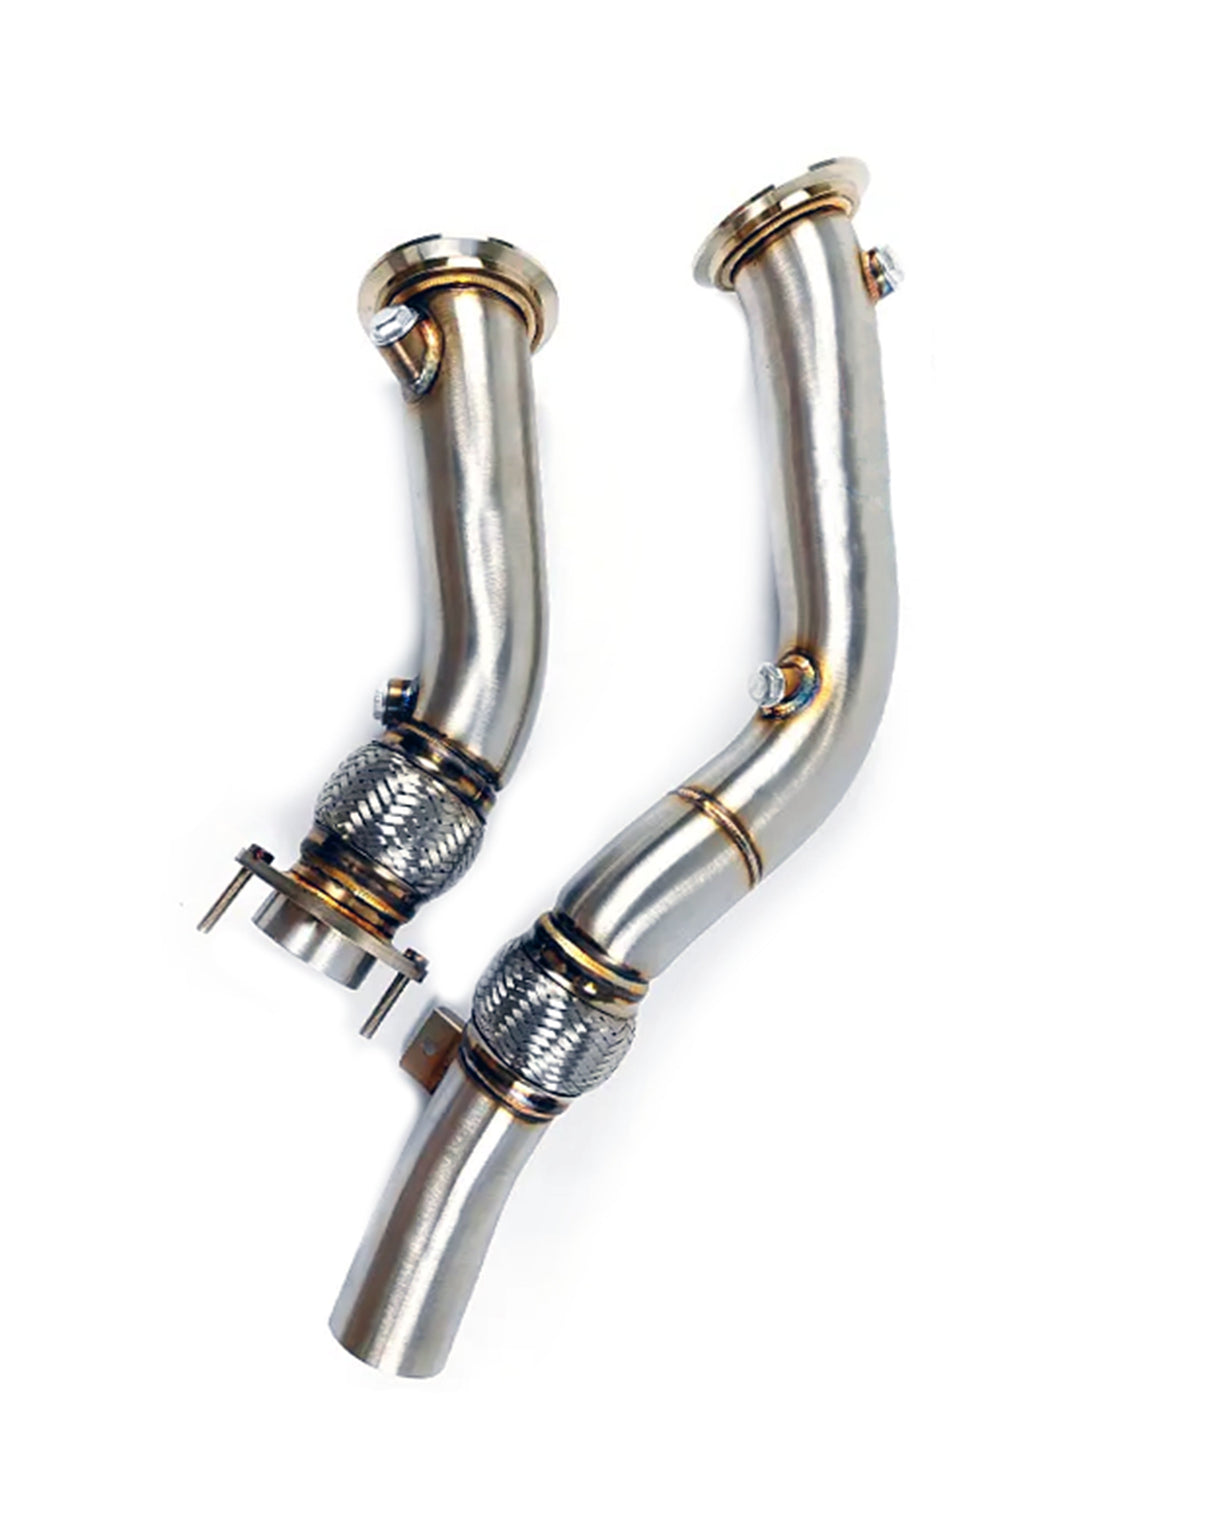 S55 Catless Downpipes